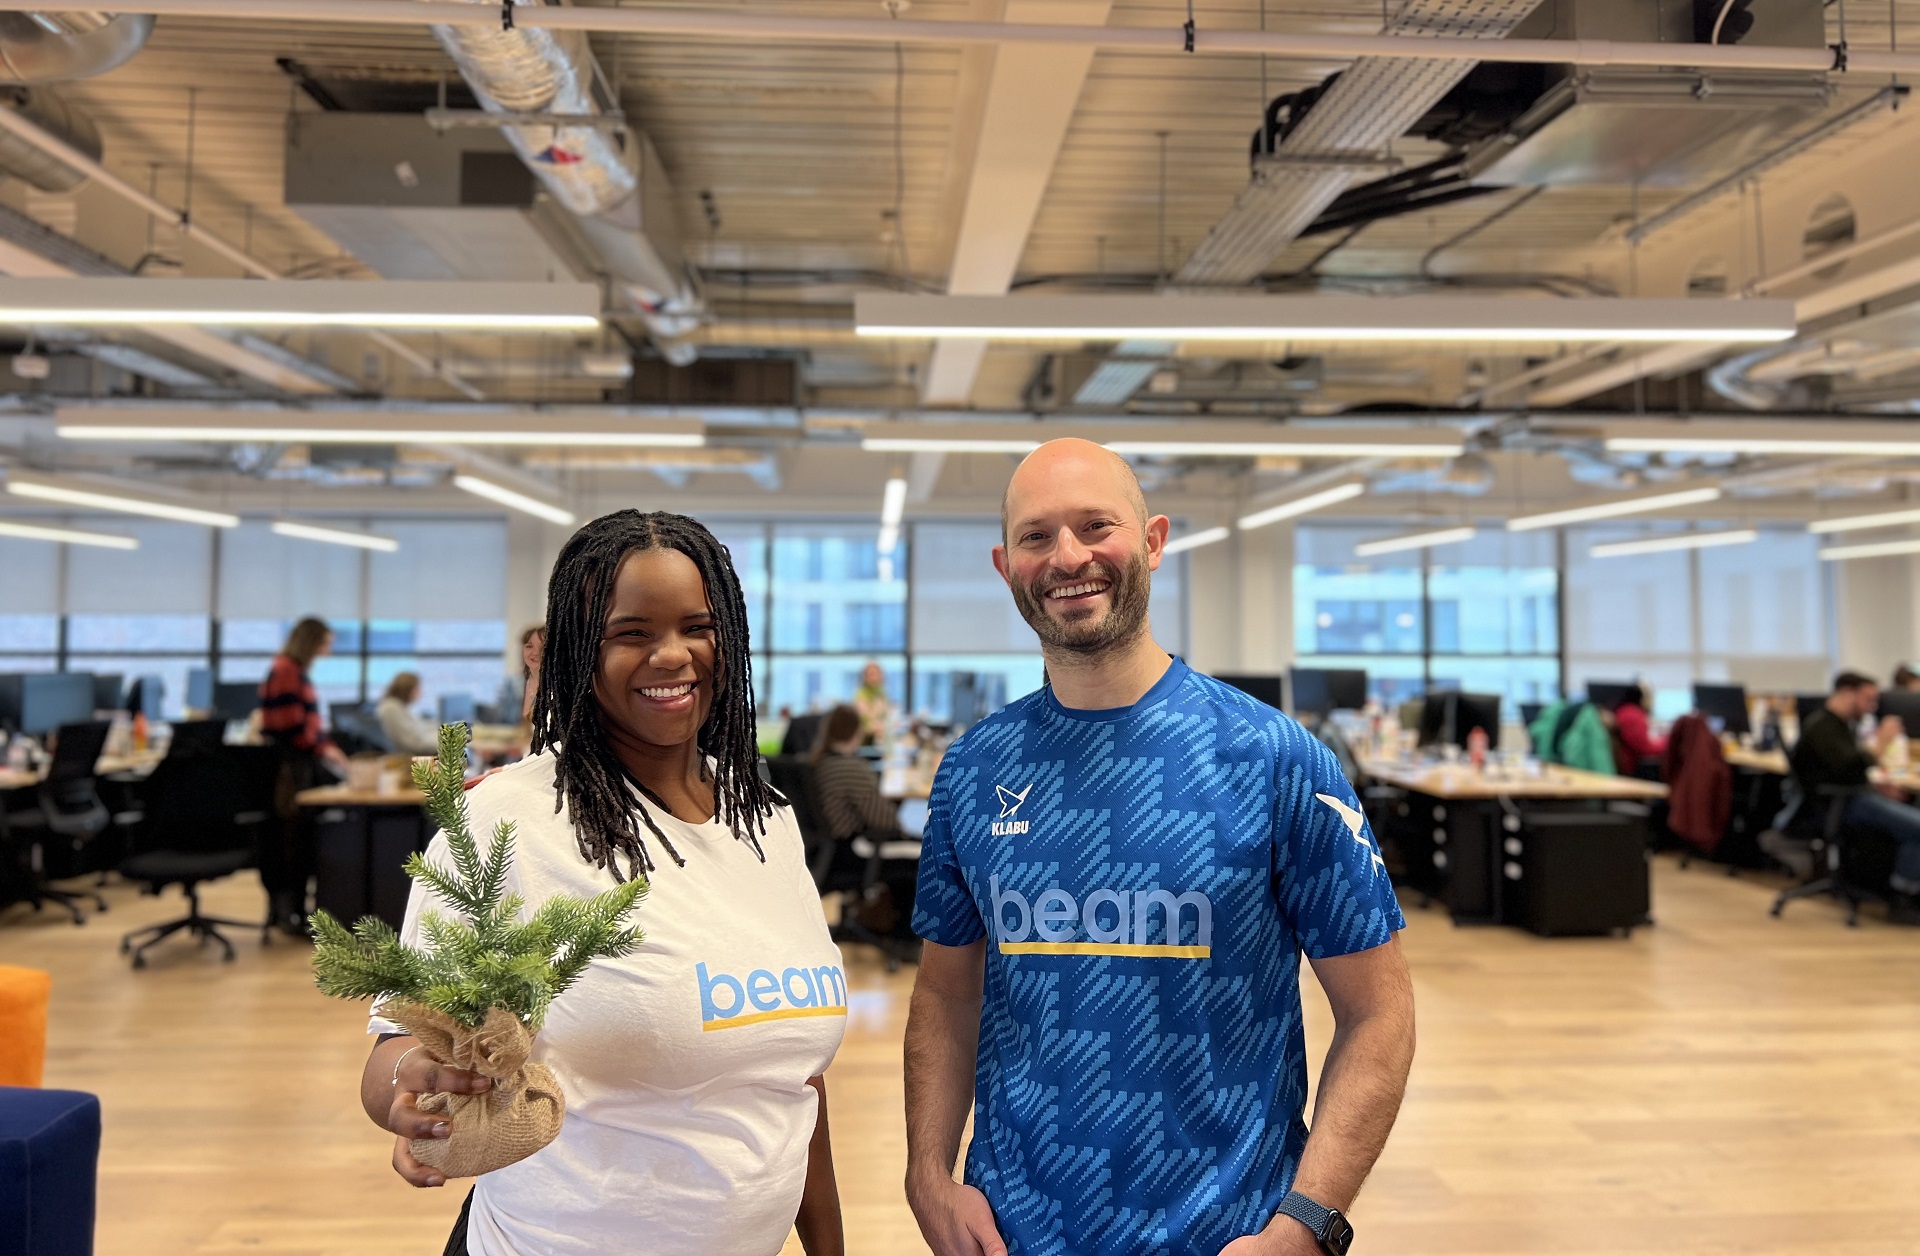 Beam's CEO, Alex Stephany and Regina from South London